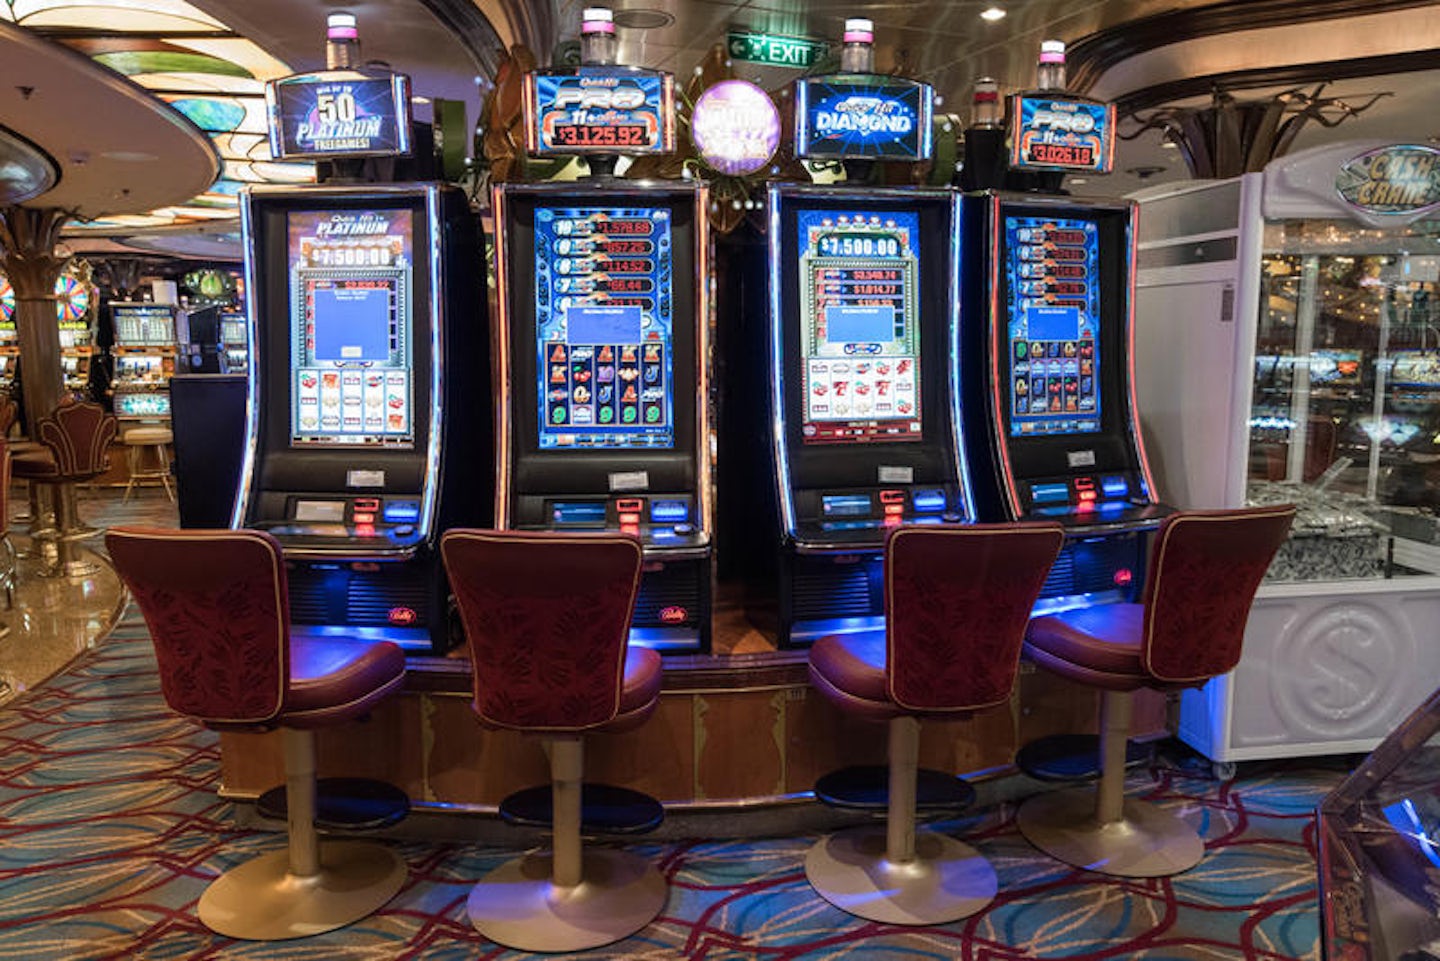 Casino Royale on Brilliance of the Seas